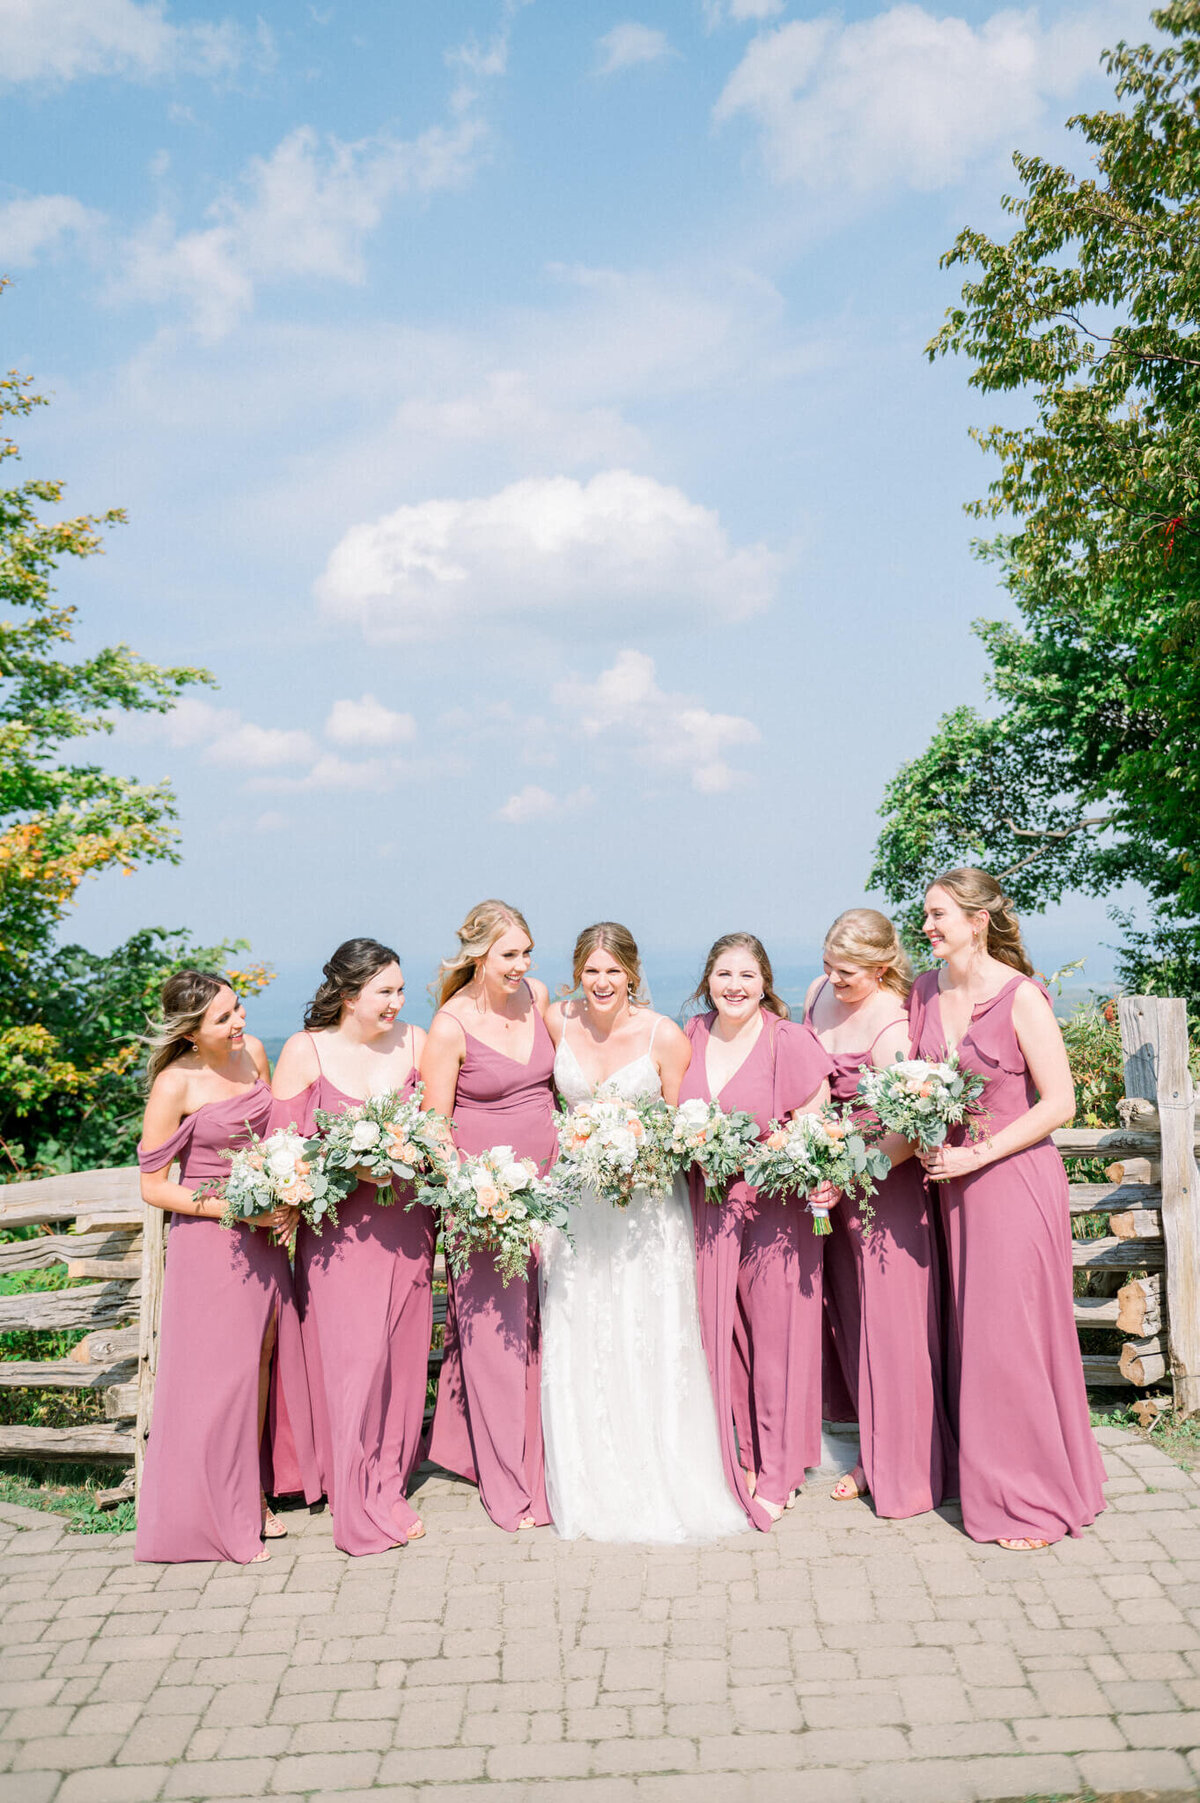 Niagara wedding photography of bridesmaids holding their flowers for a picture